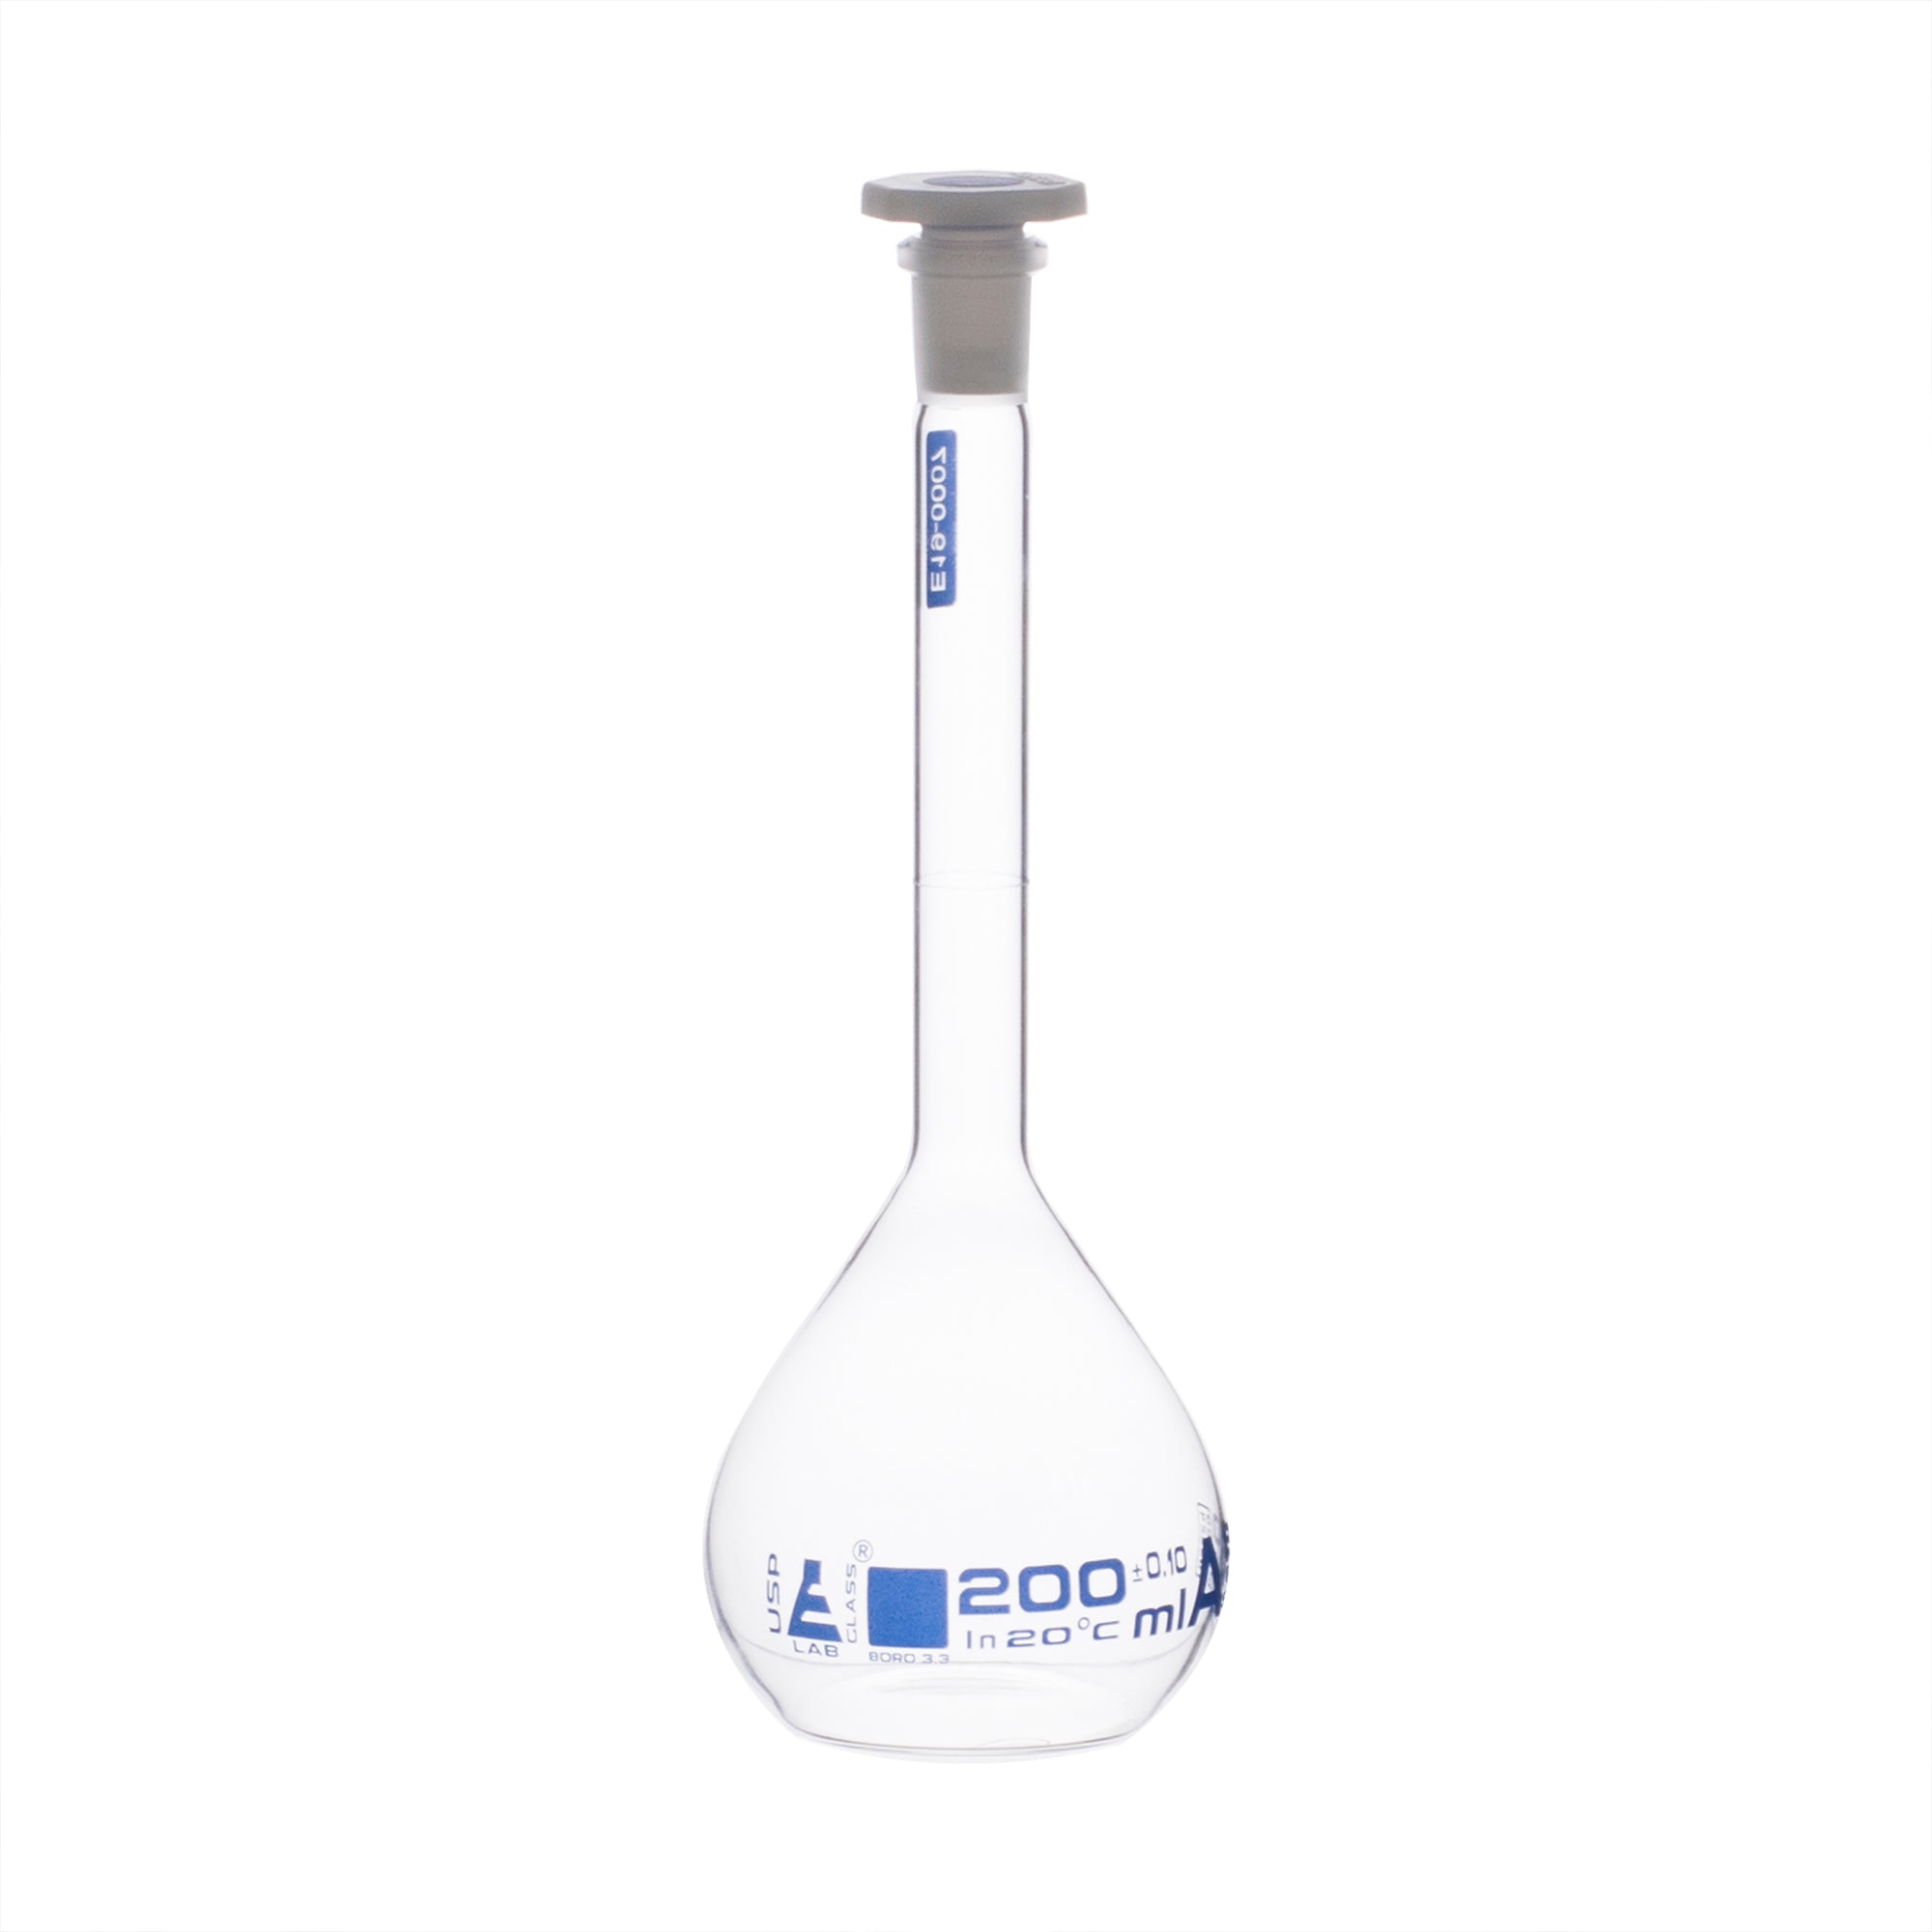 Borosilicate Glass Volumetric Flask with Solid Glass Stopper, 200 ml, USP Class A with Individual Work Certificate,  Pack of 2, Autoclavable